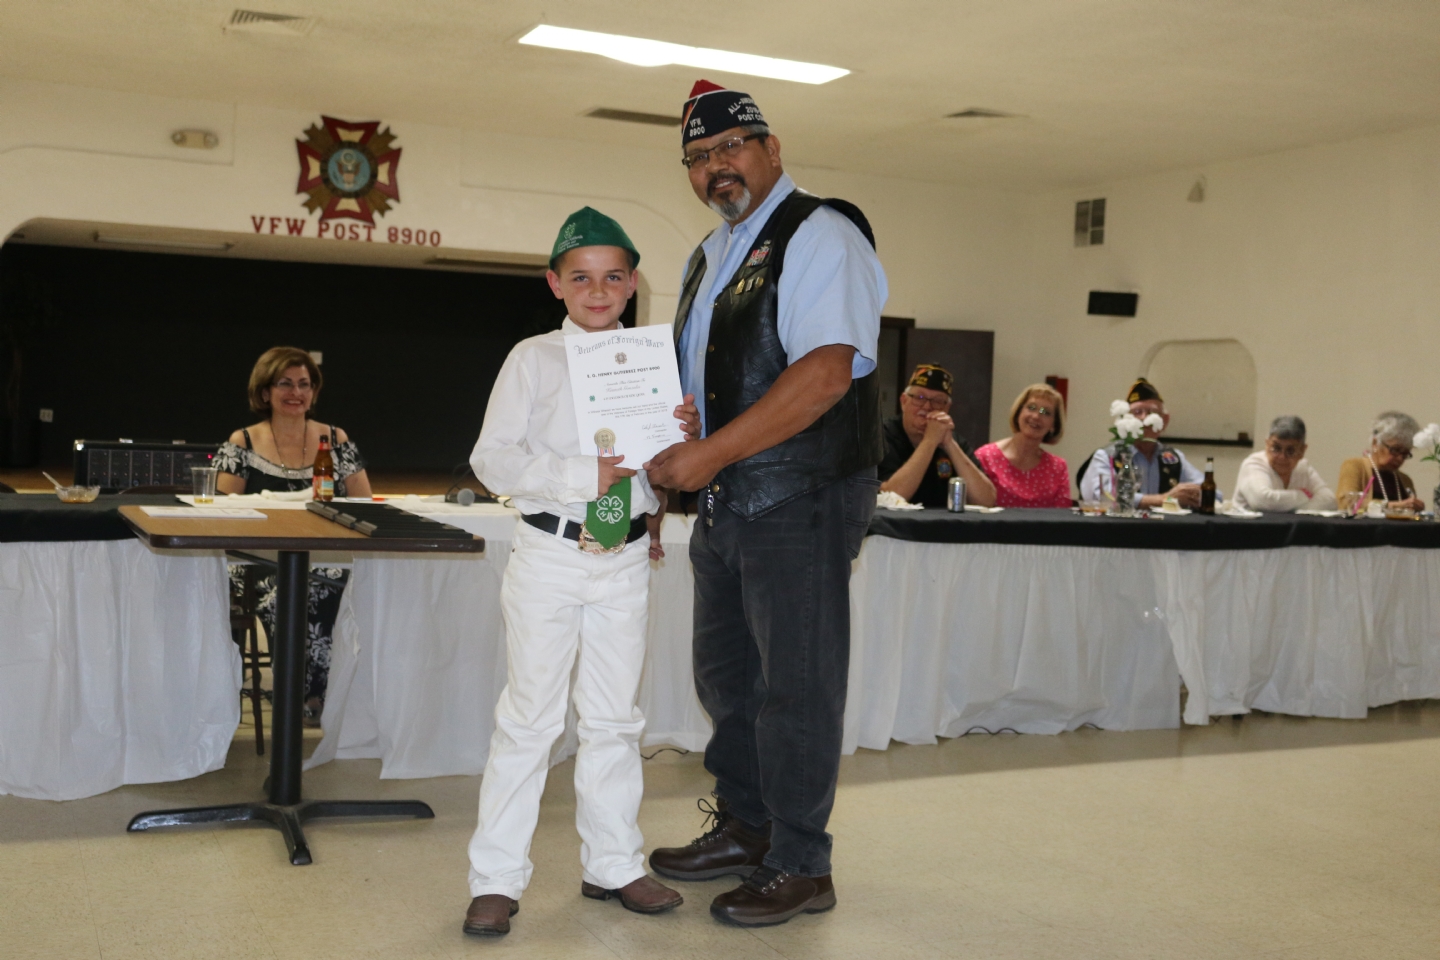 Commander Fernandez presents the 4H Member of the Year.